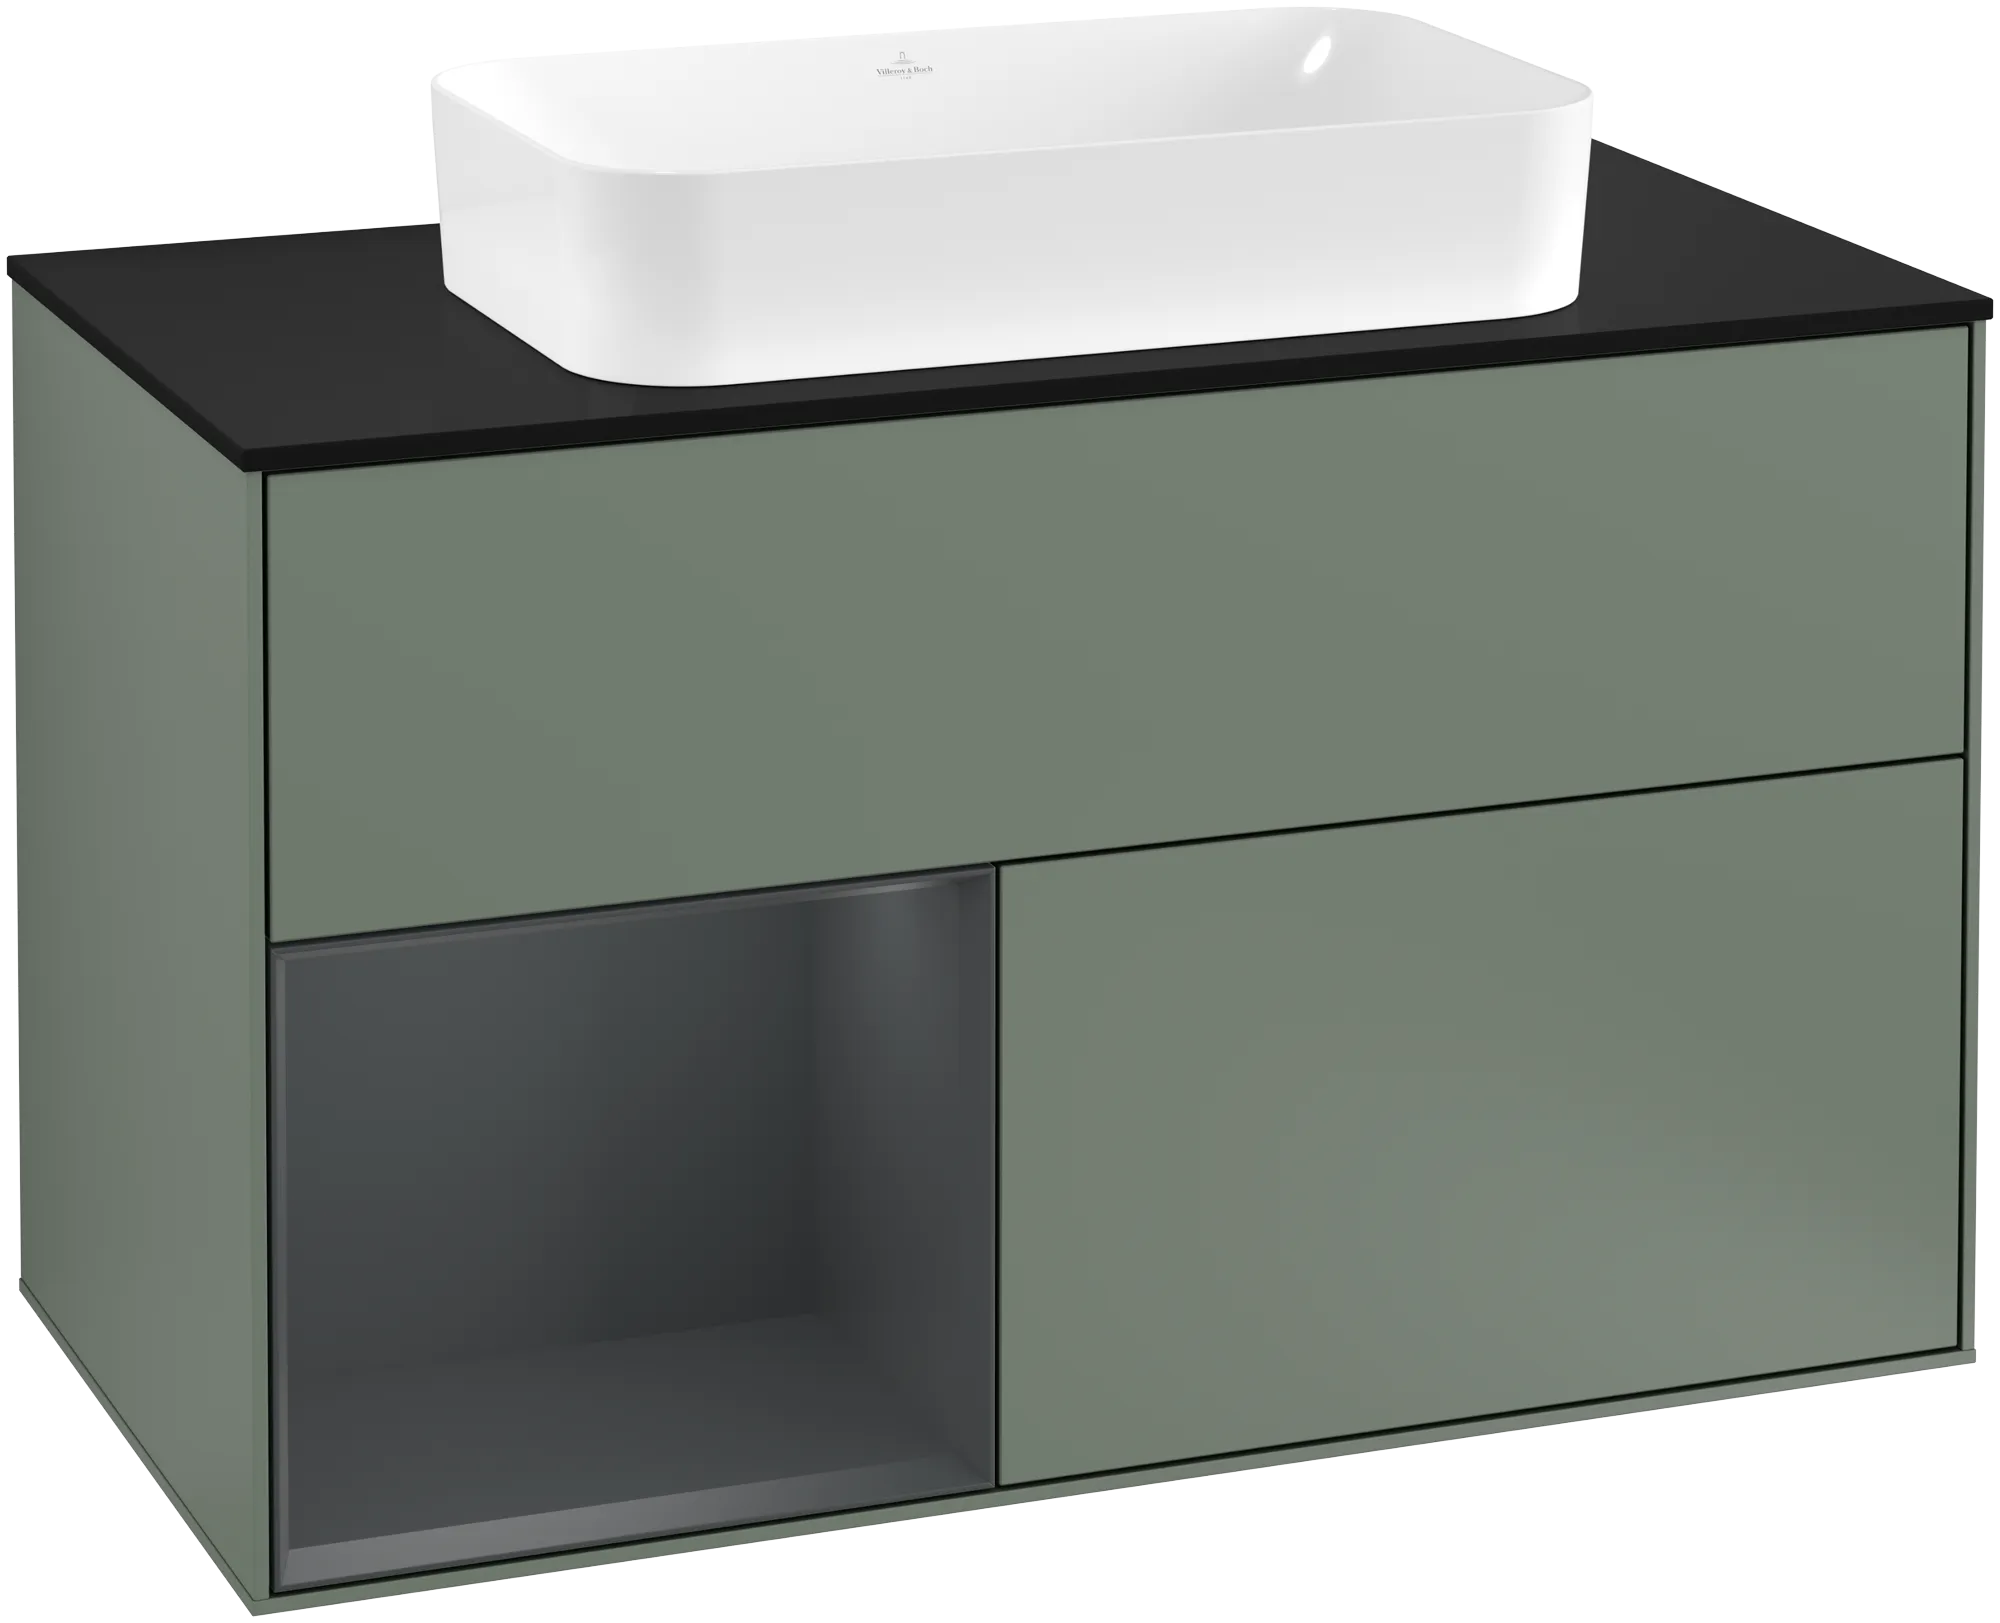 Picture of VILLEROY BOCH Finion Vanity unit, with lighting, 2 pull-out compartments, 1000 x 603 x 501 mm, Olive Matt Lacquer / Midnight Blue Matt Lacquer / Glass Black Matt #G242HGGM